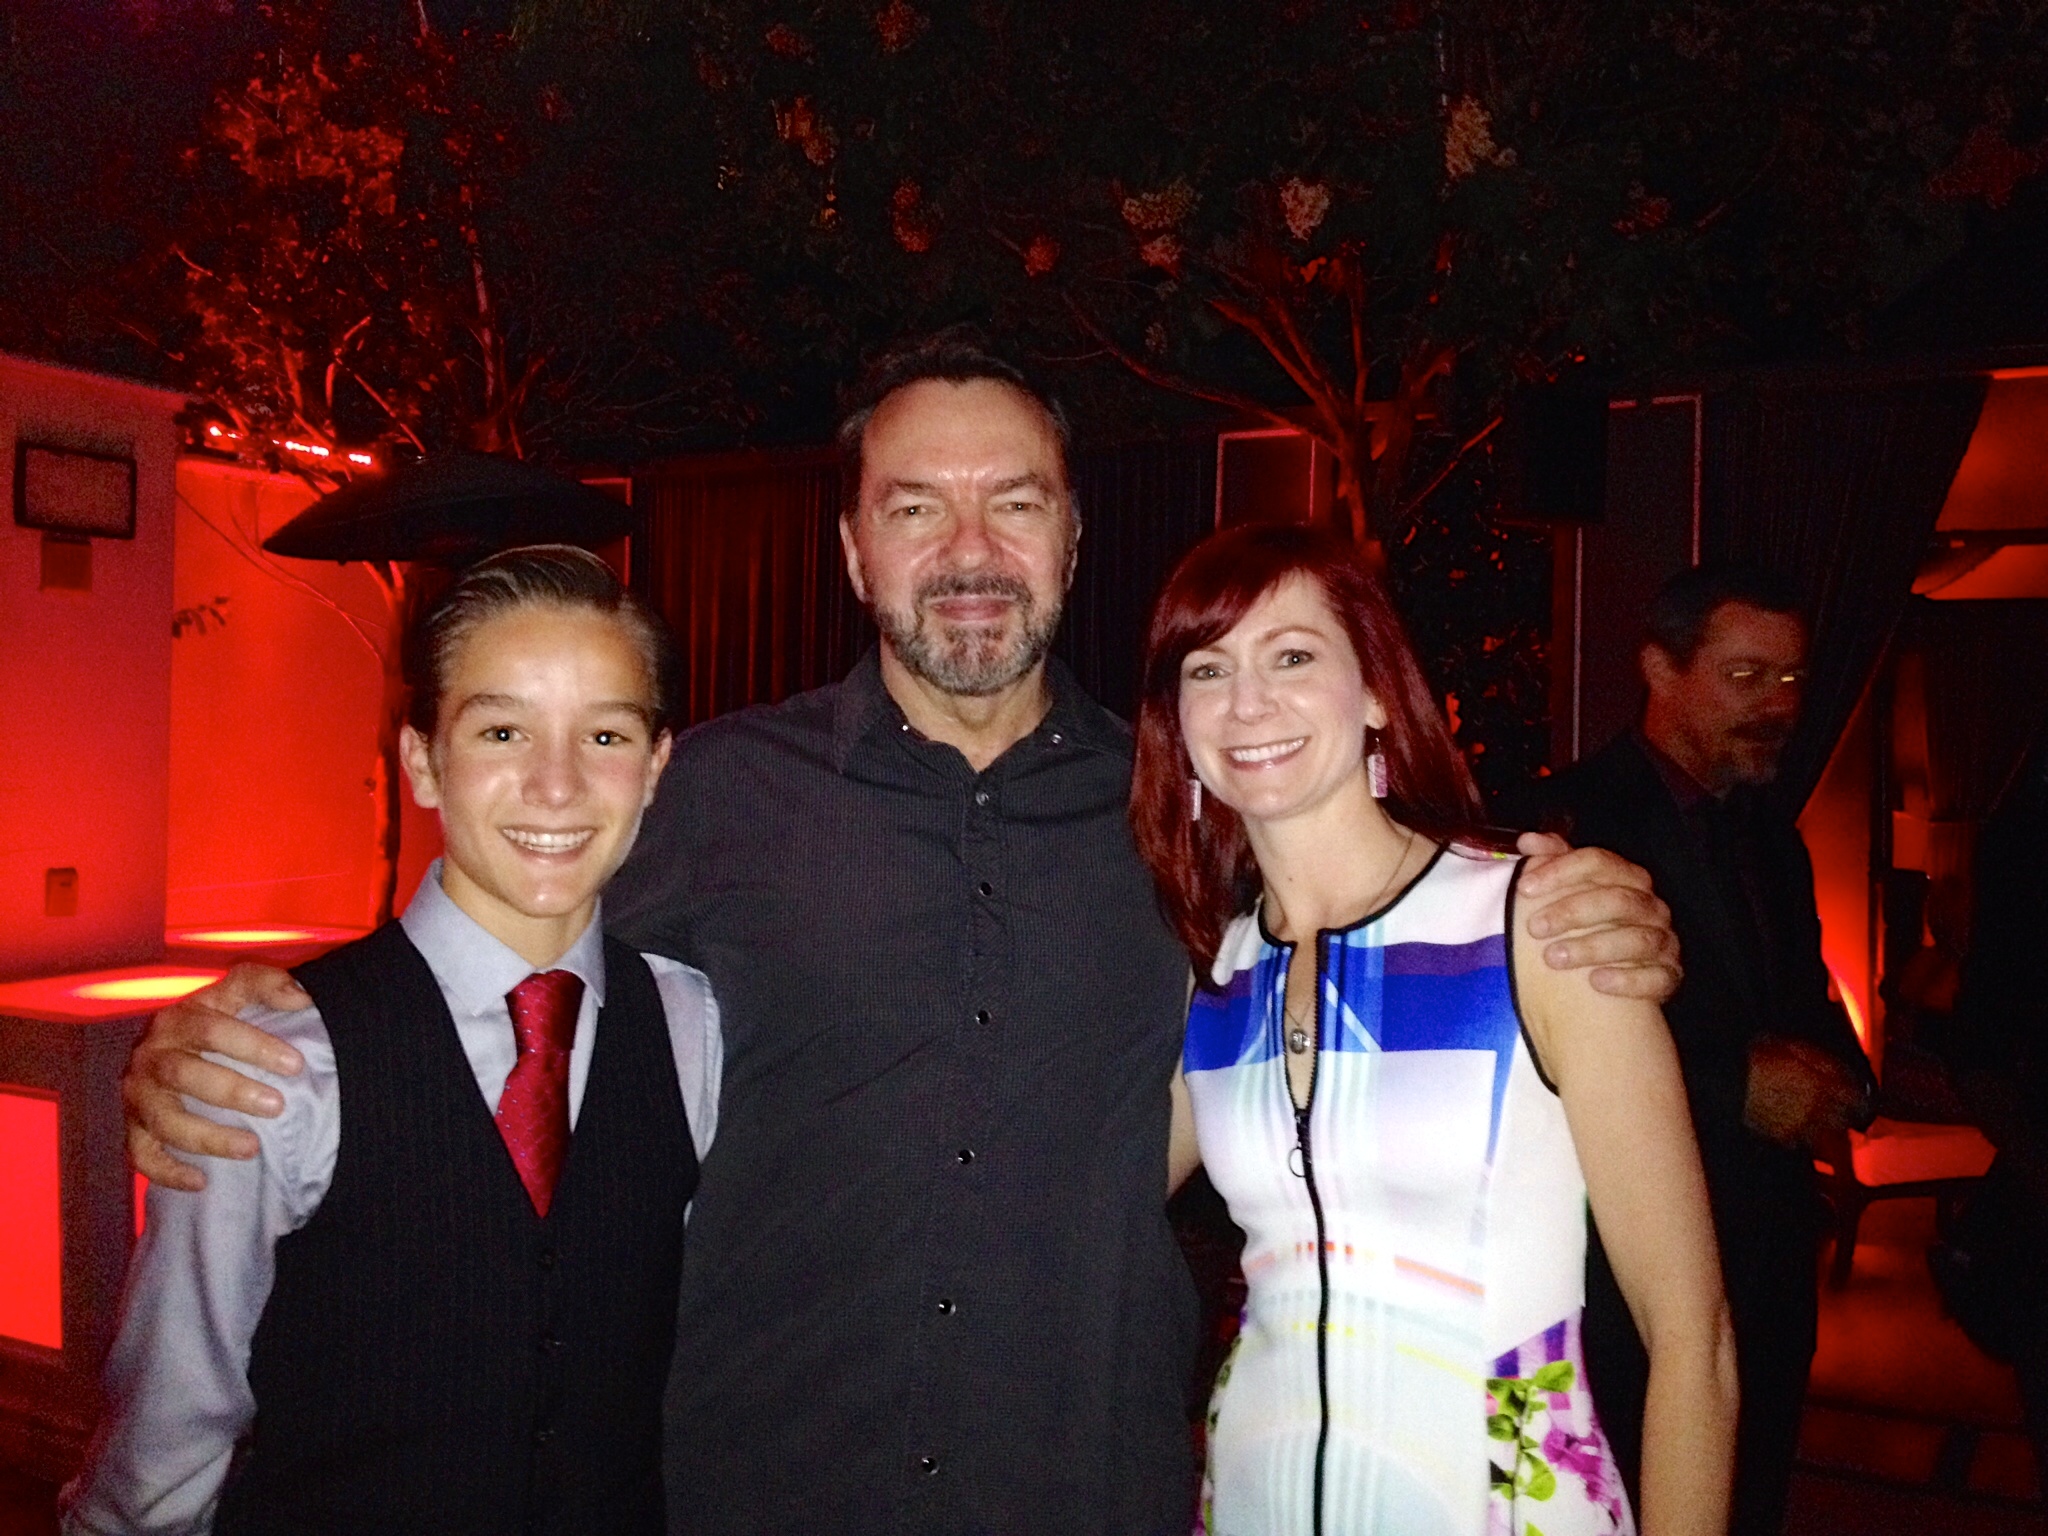 Alec Gray, Alan Ball, and Carrie Preston at the True Blood Series Wrap Party